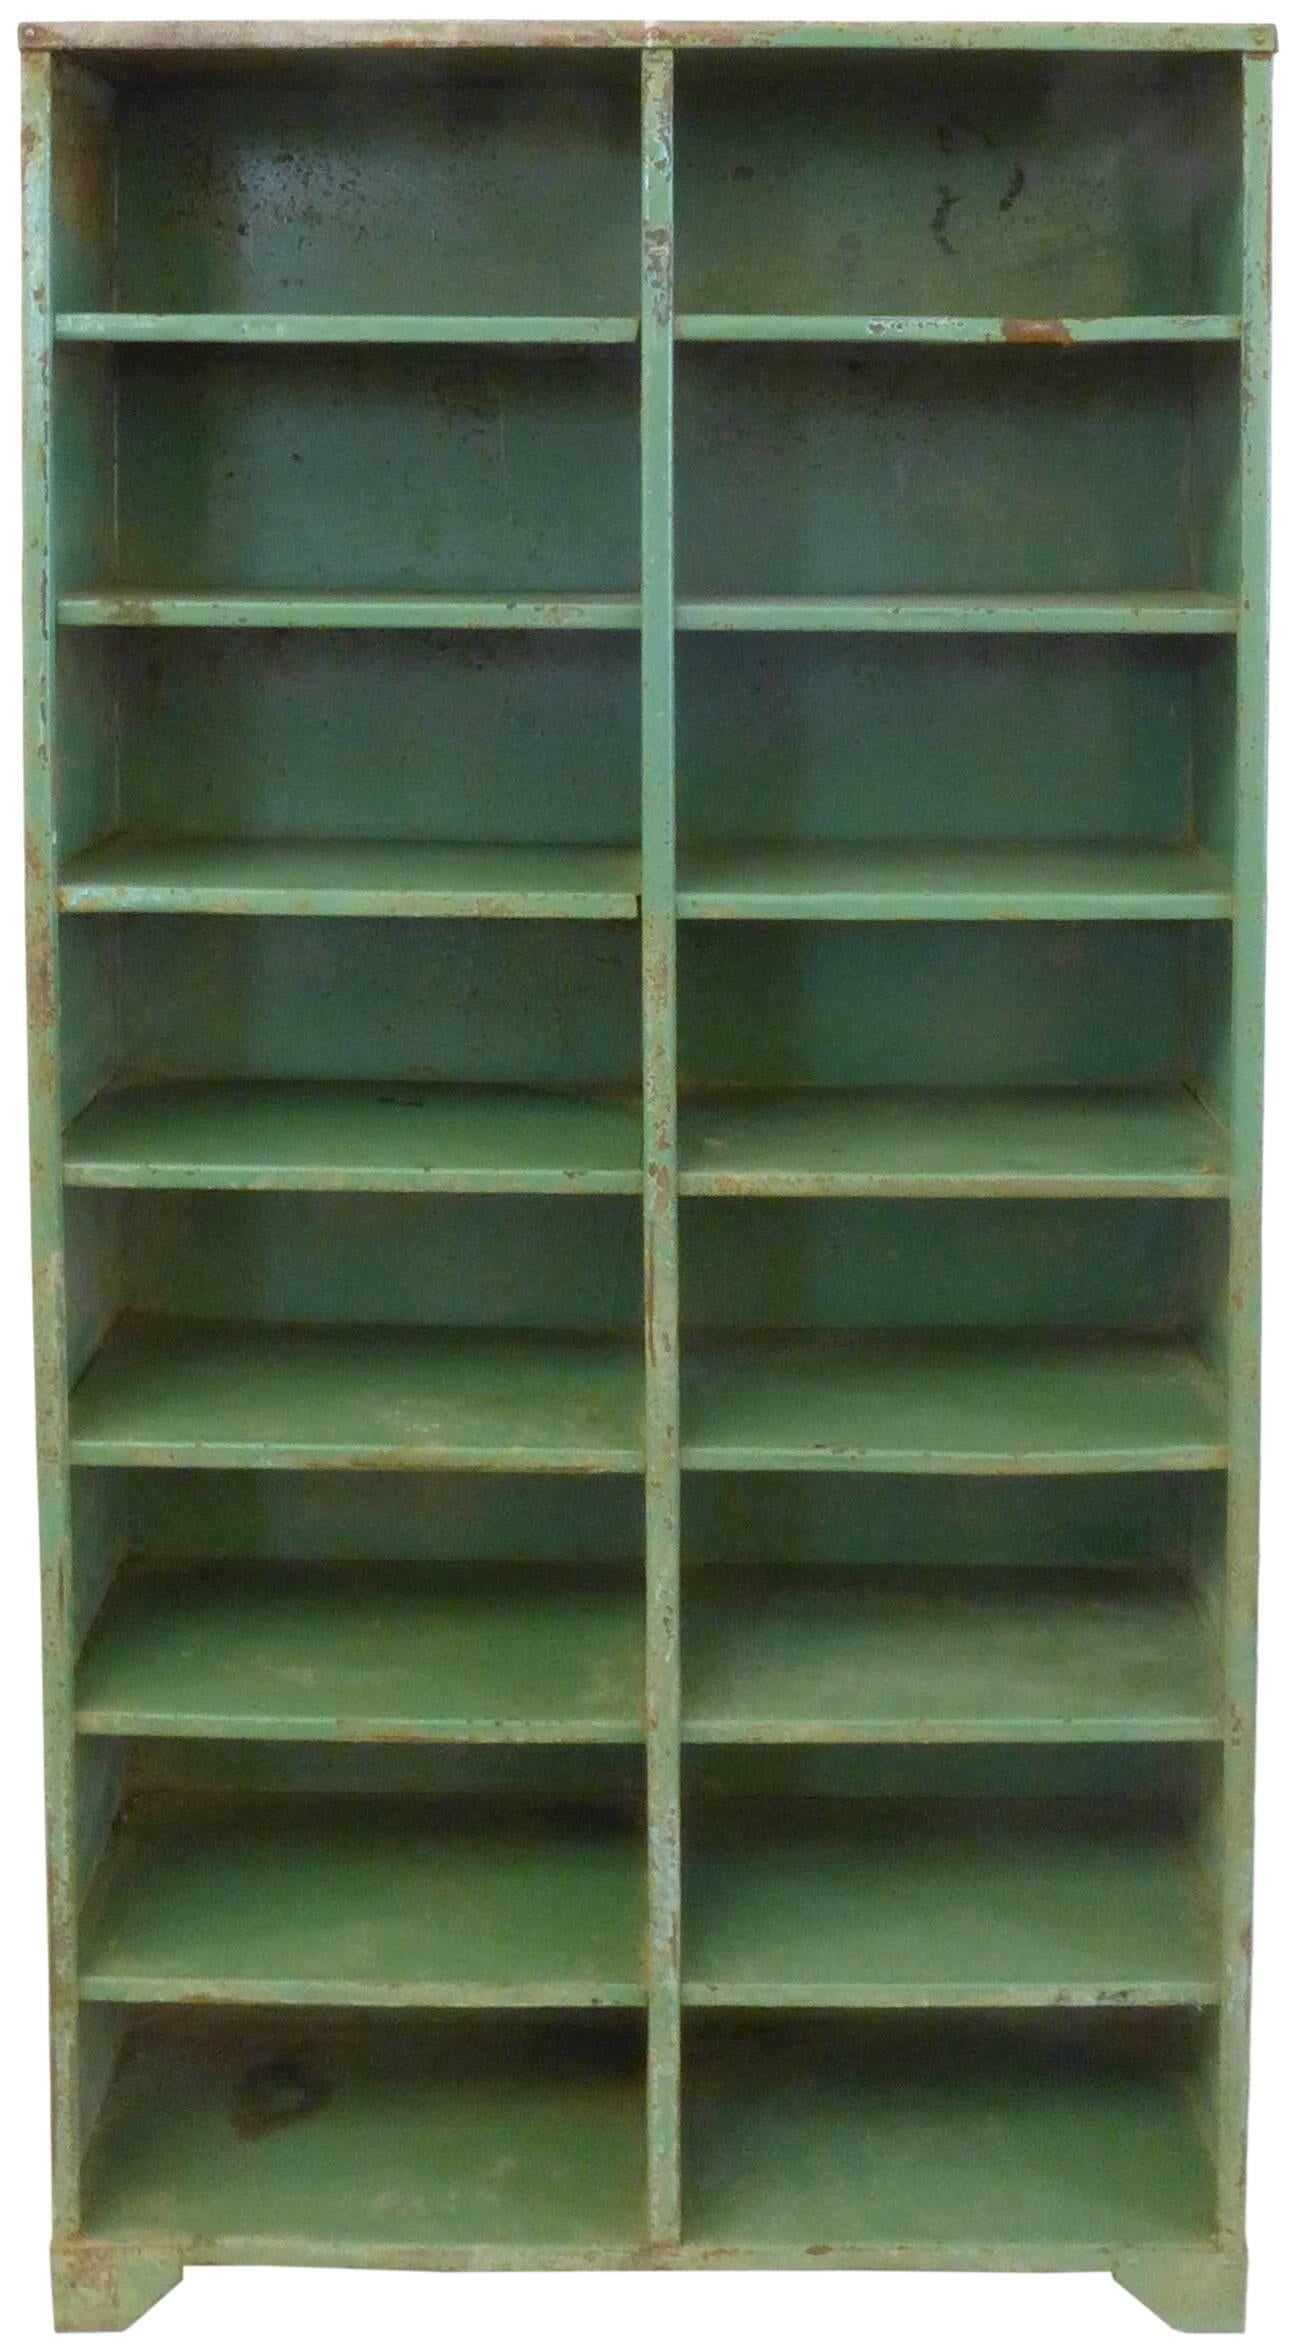 An outstanding 1930s French Industrial shelving unit. Great scale and modernist simplicity in design, this welded-steel unit wears a beautifully worn, enameled Prouvé-green; a much desired patina of oxidation and other wear-and-tear from years of